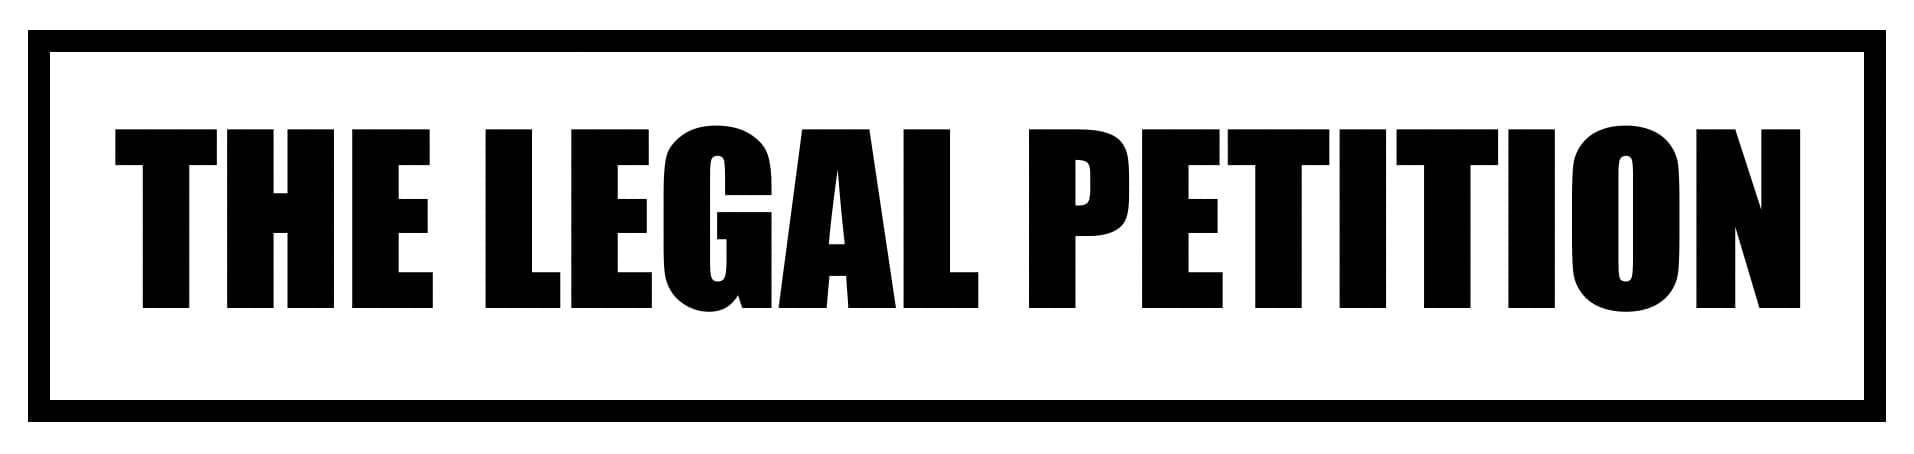 HEADER - THE LEGAL PETITION